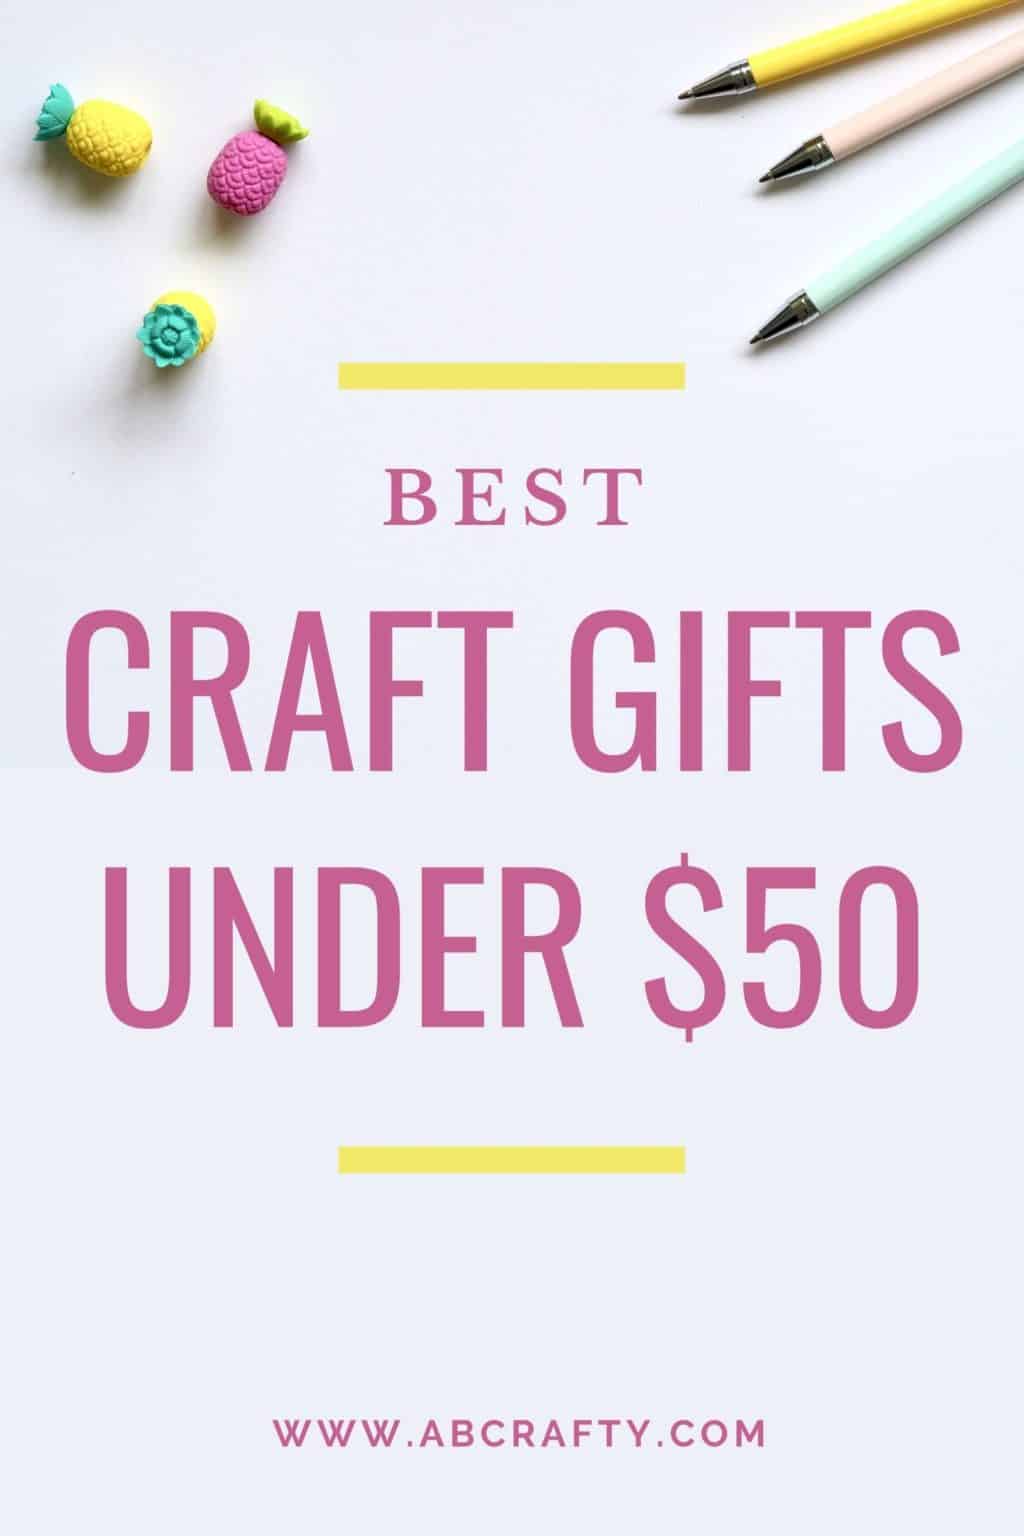 colored pencils and pineapple erasers with the title "best craft gifts under $50, by abcrafty.com"